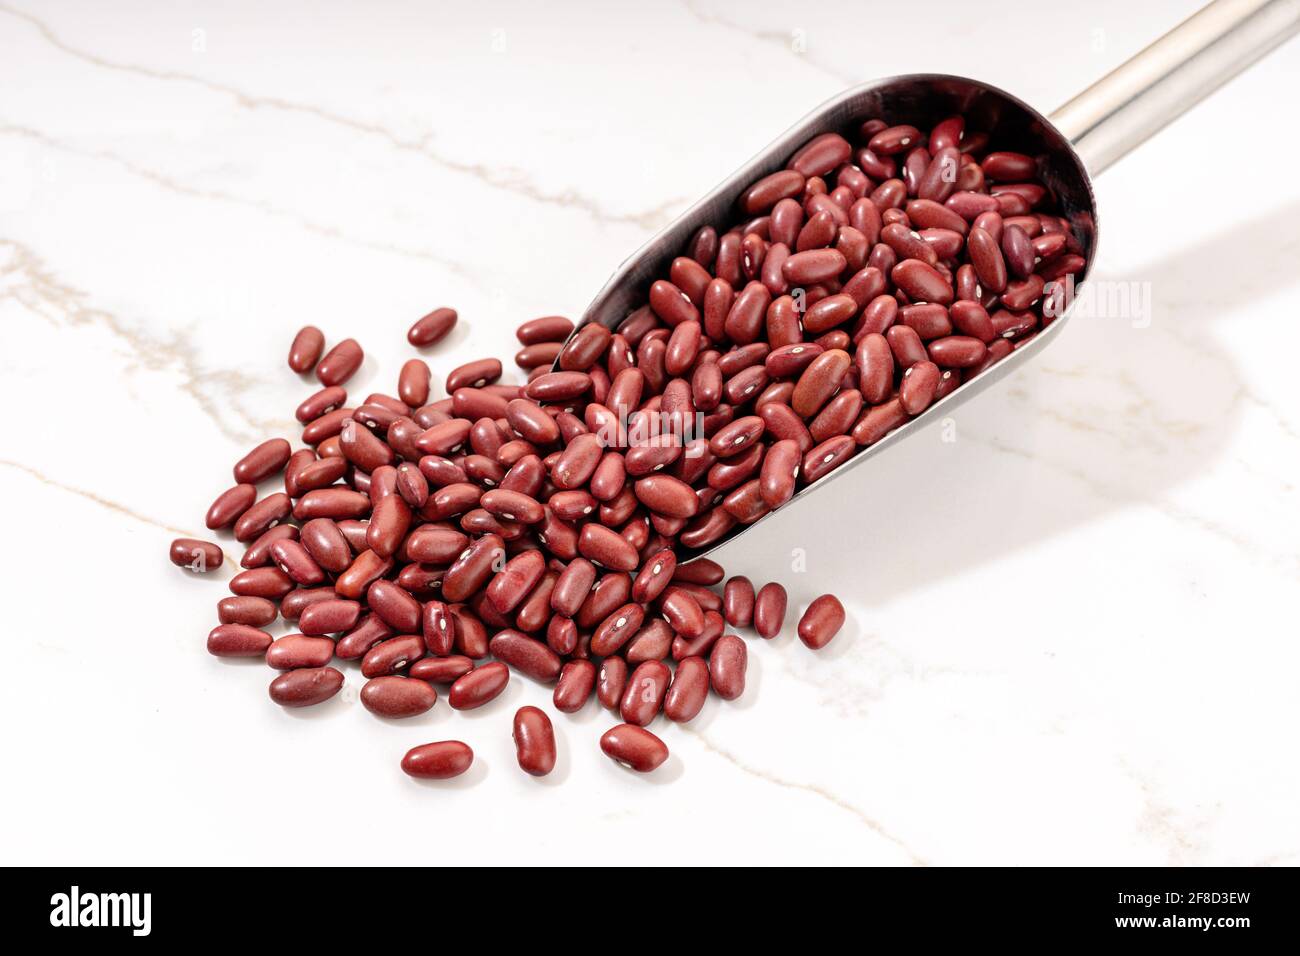 Uncooked Red beans on metallic scoop on white marble table. Phaseolus vulgaris Stock Photo